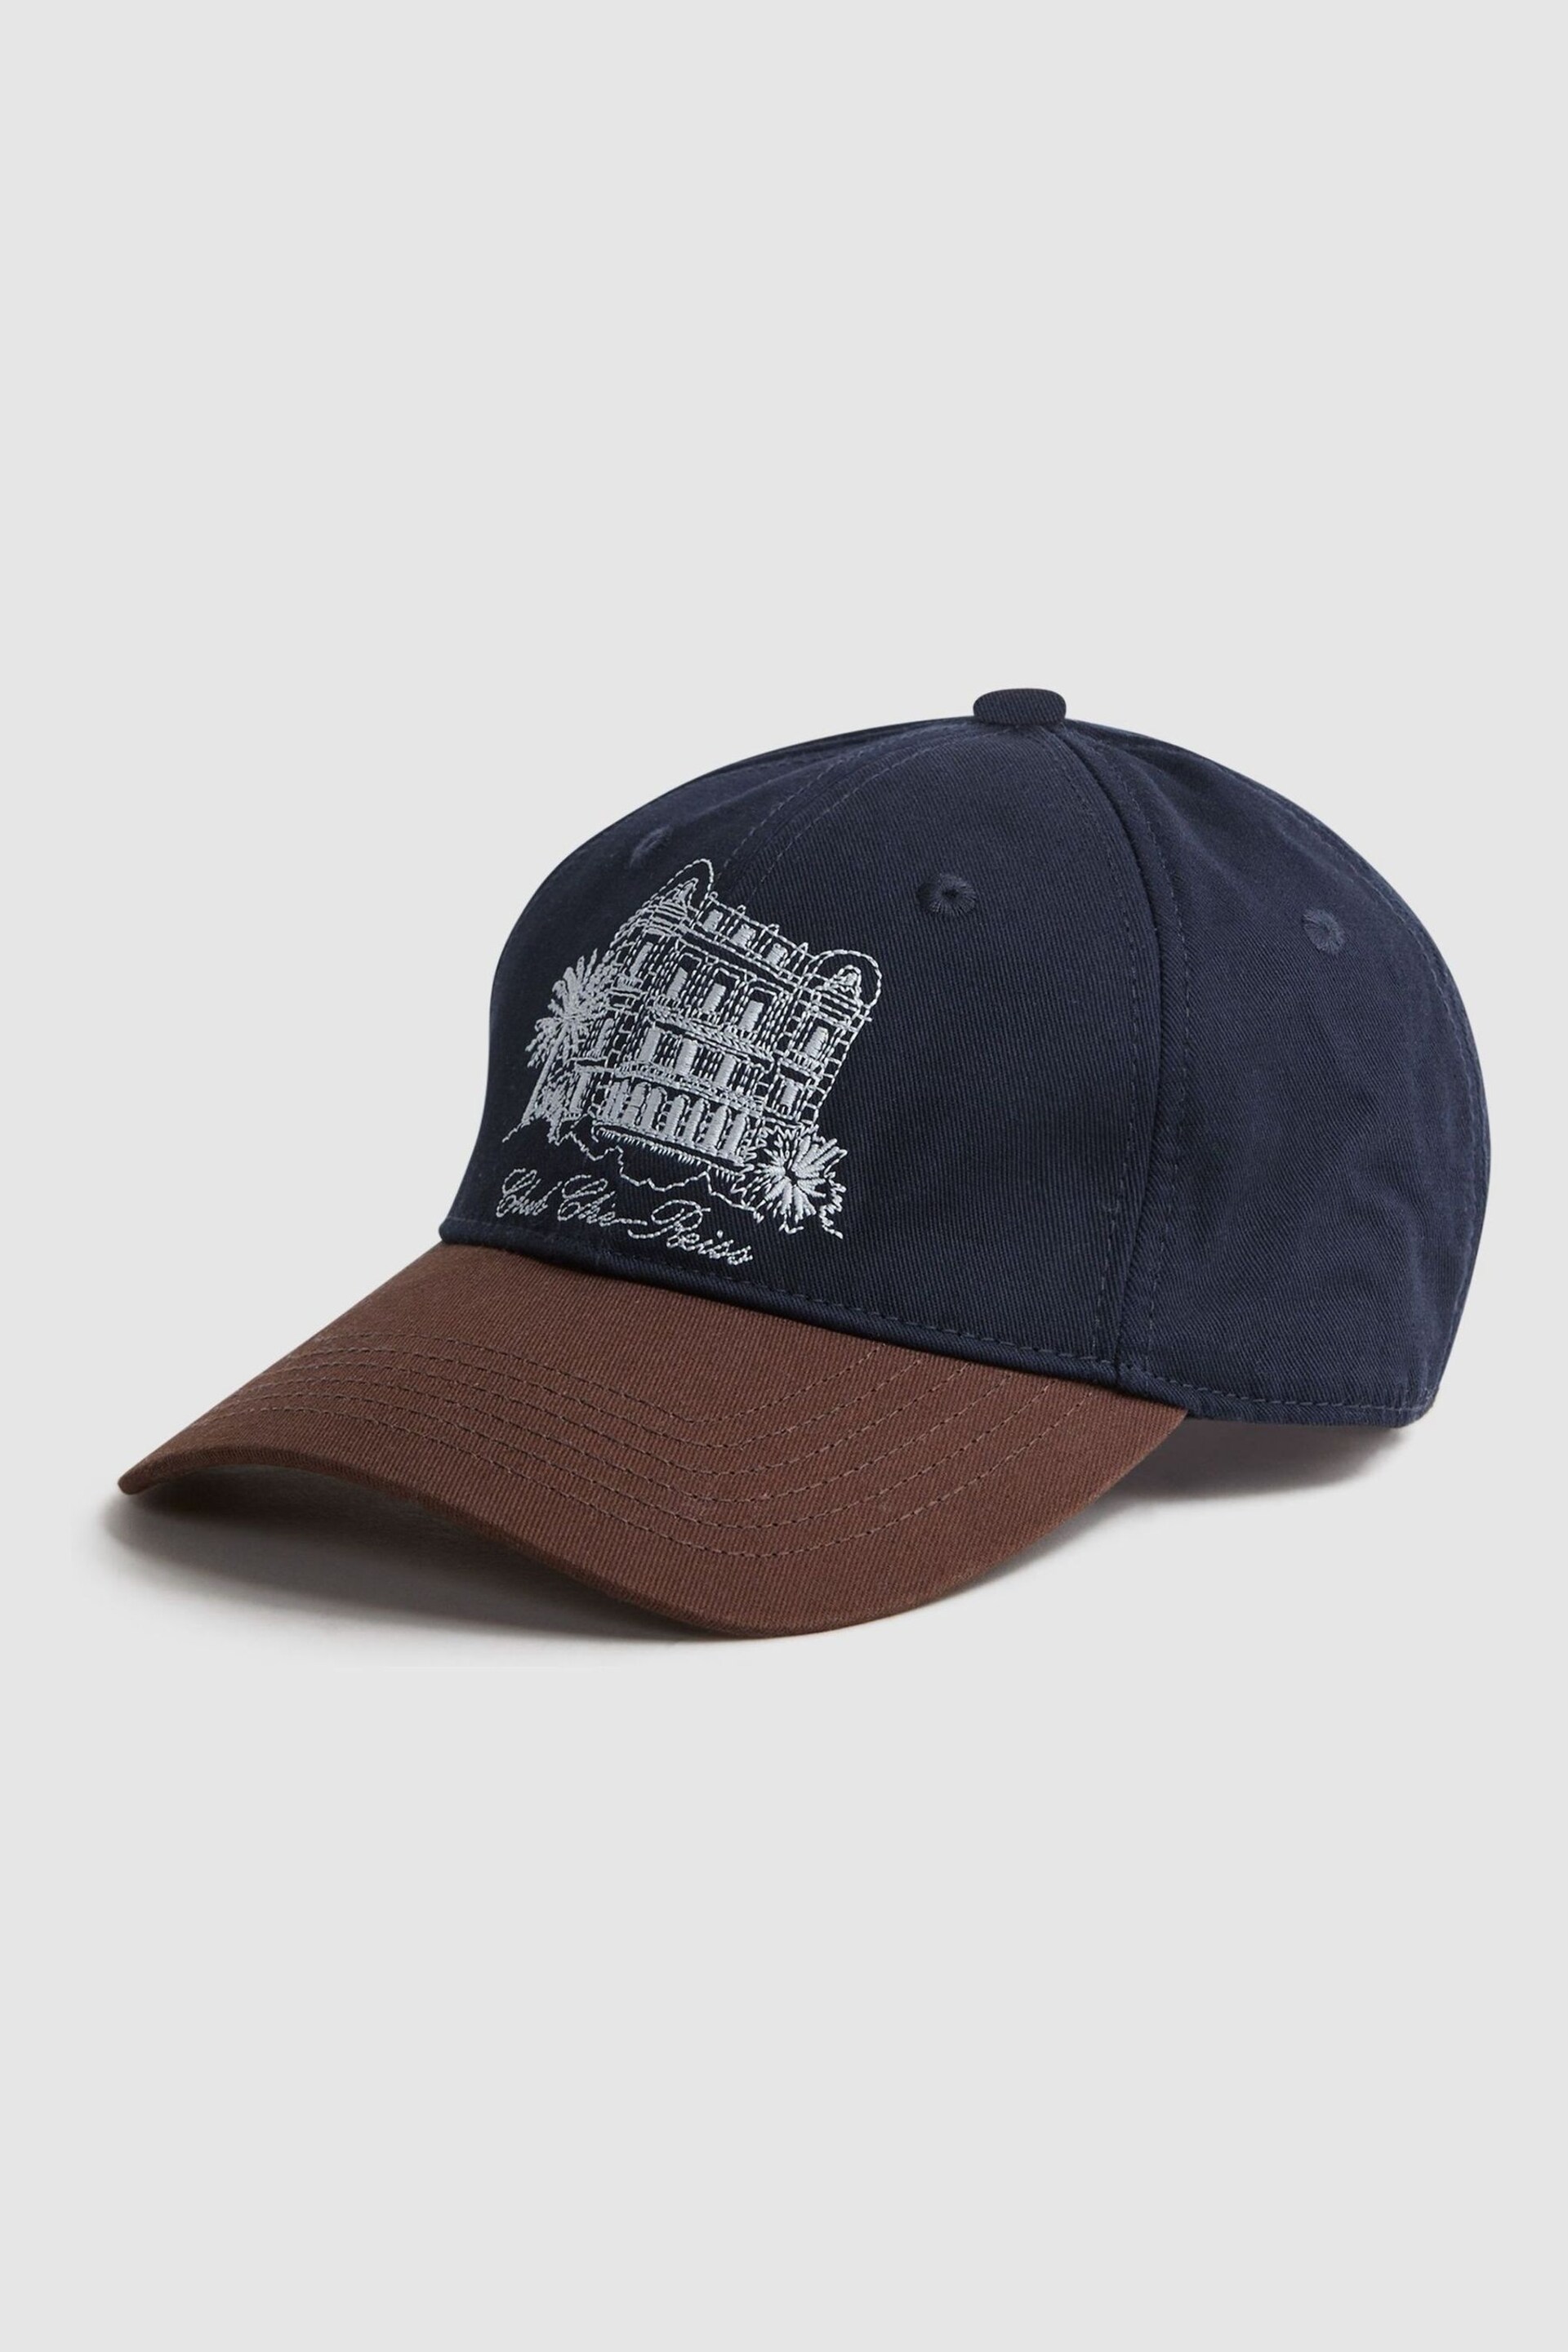 Reiss Navy/Tobacco Palermo Reiss | Ché Embroidered Baseball Cap - Image 1 of 4